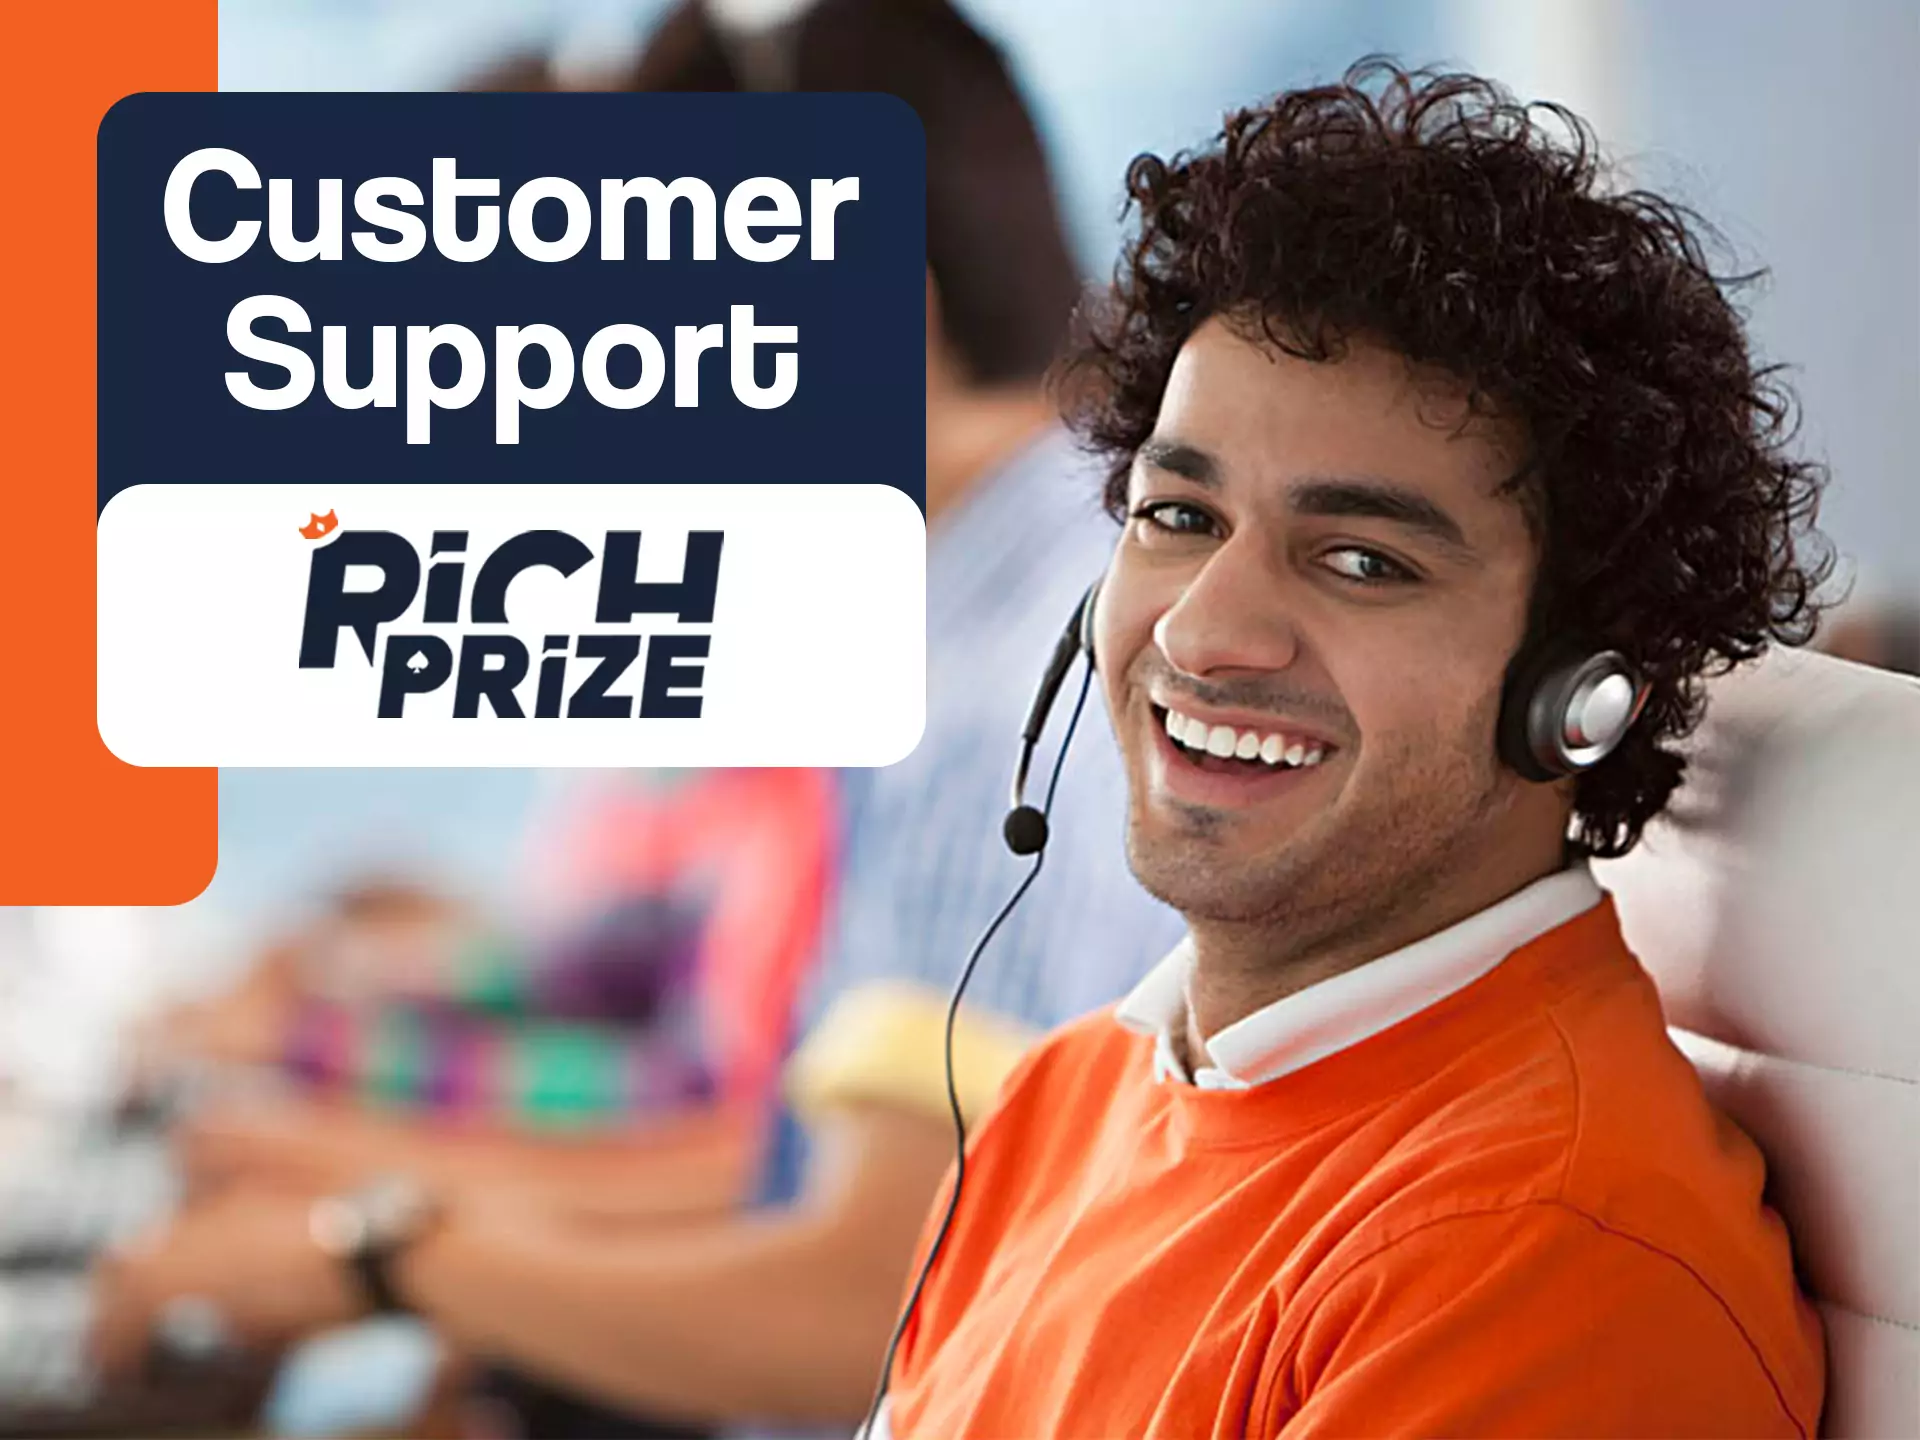 RichPrize customer support can help you with any trouble.